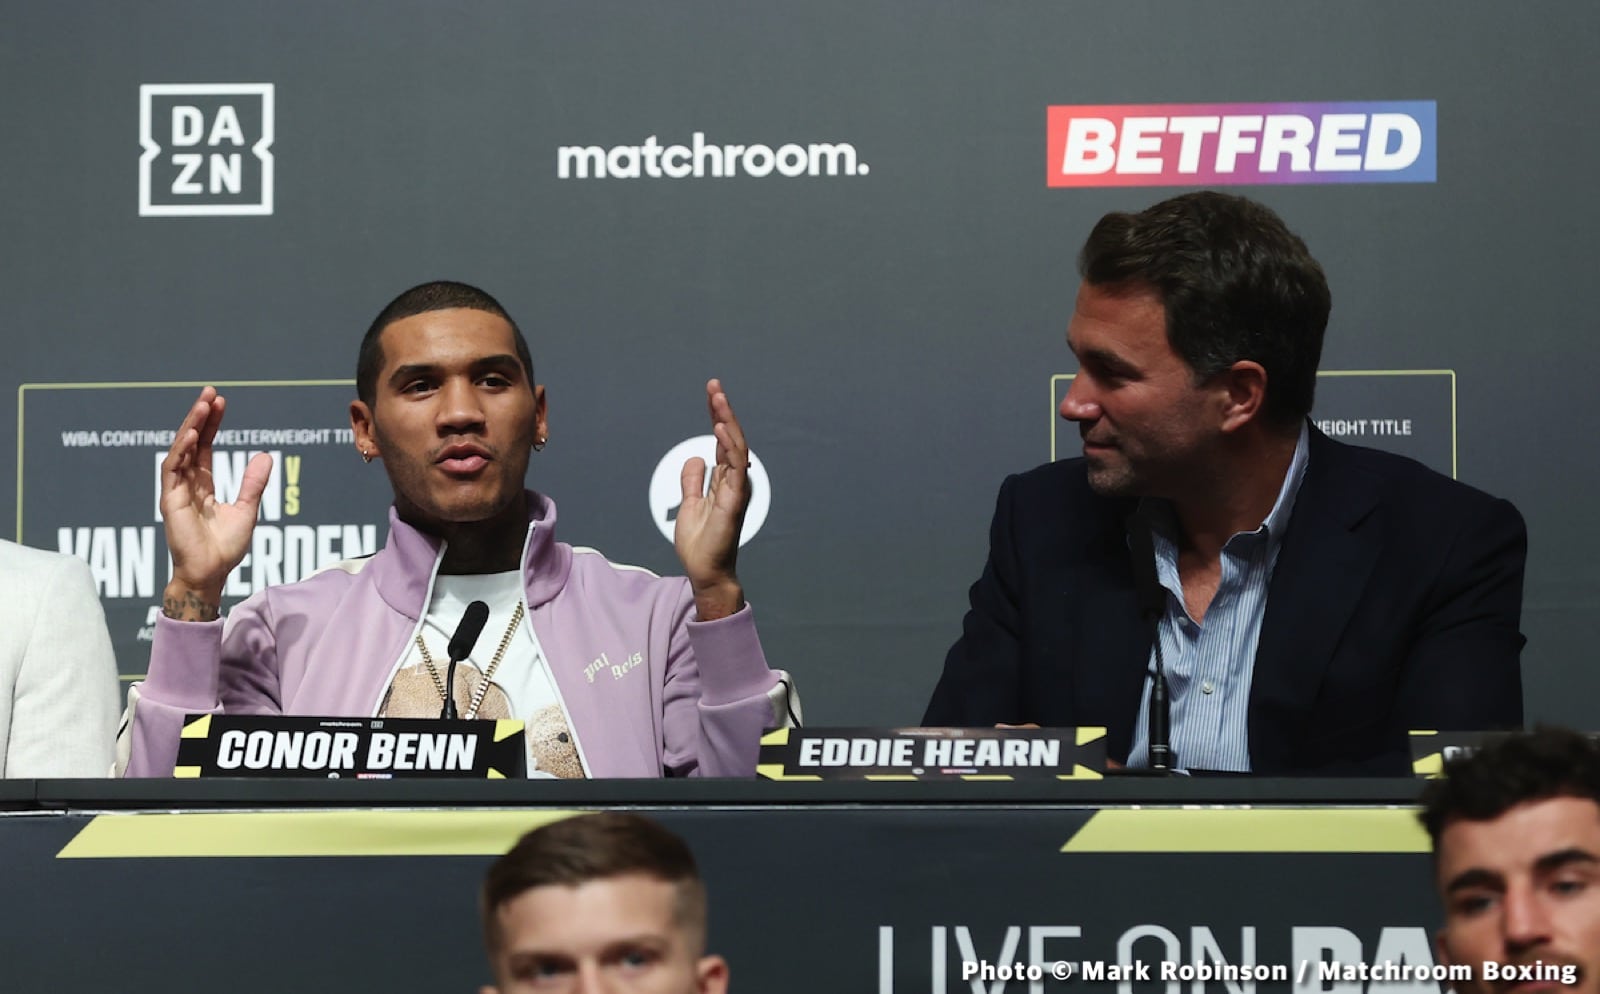 Image: Conor Benn latest Instagram post: "The evidence doesn't lie"